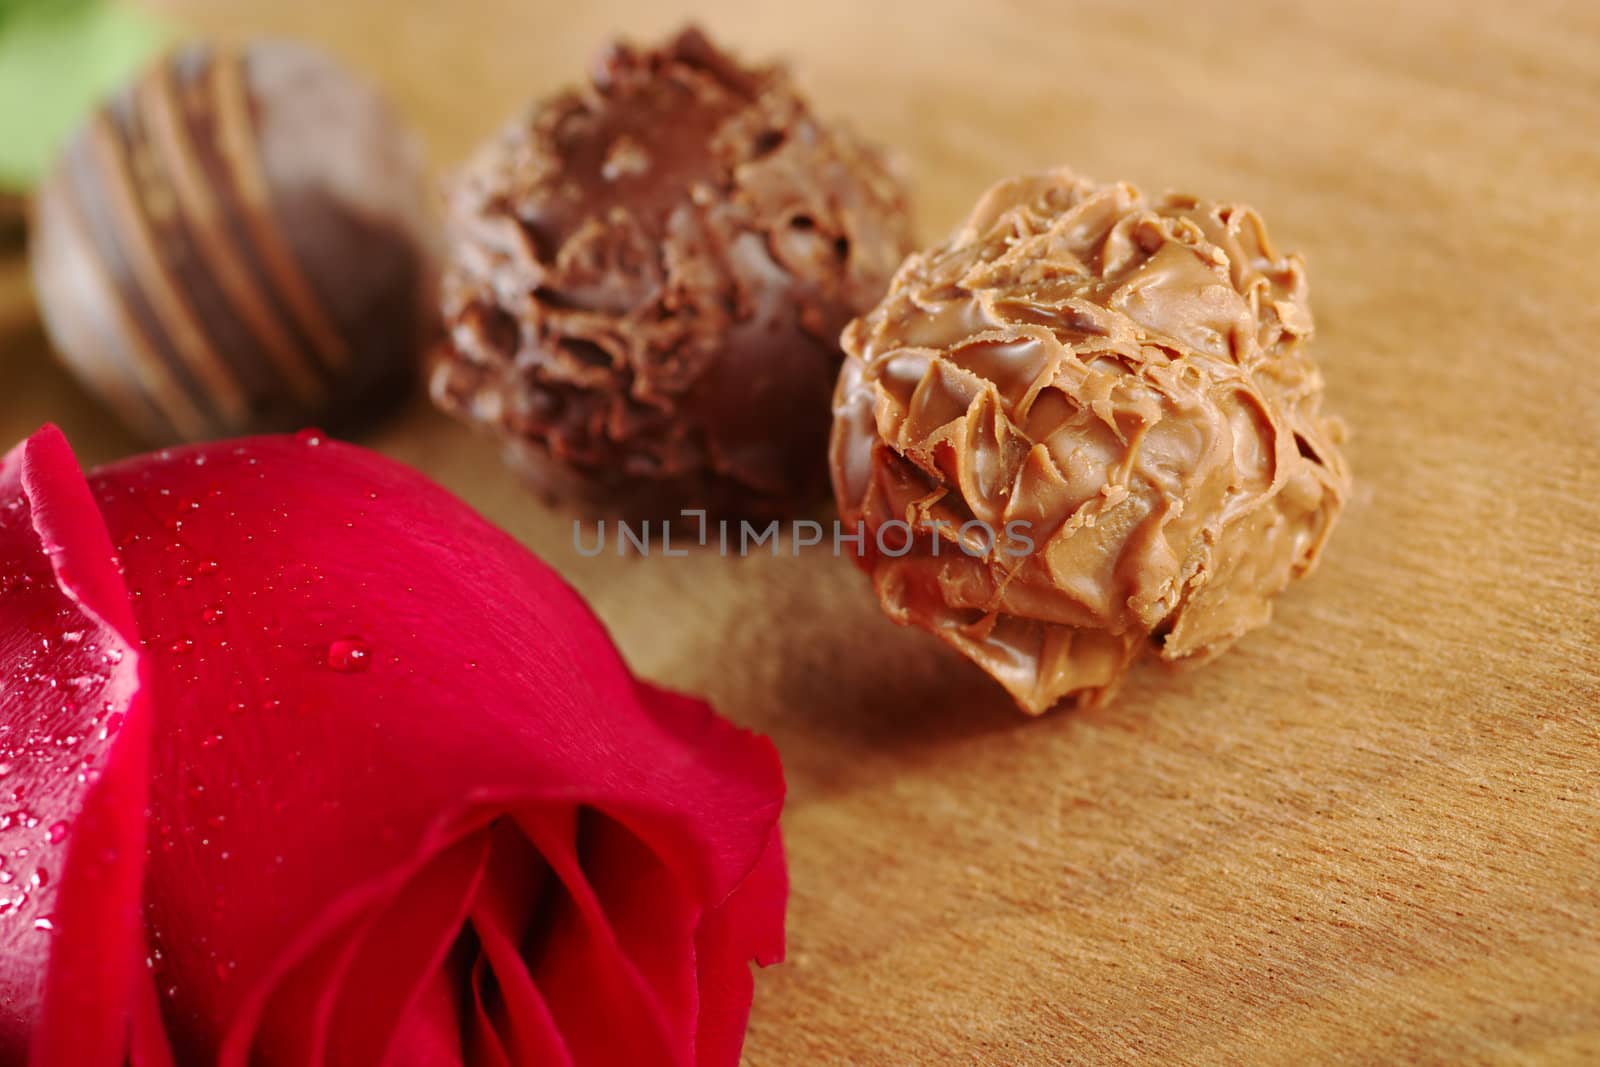 Truffles with a red rose on wooden board (Very Shallow Depth of Field, Focus on the front of the first truffle)